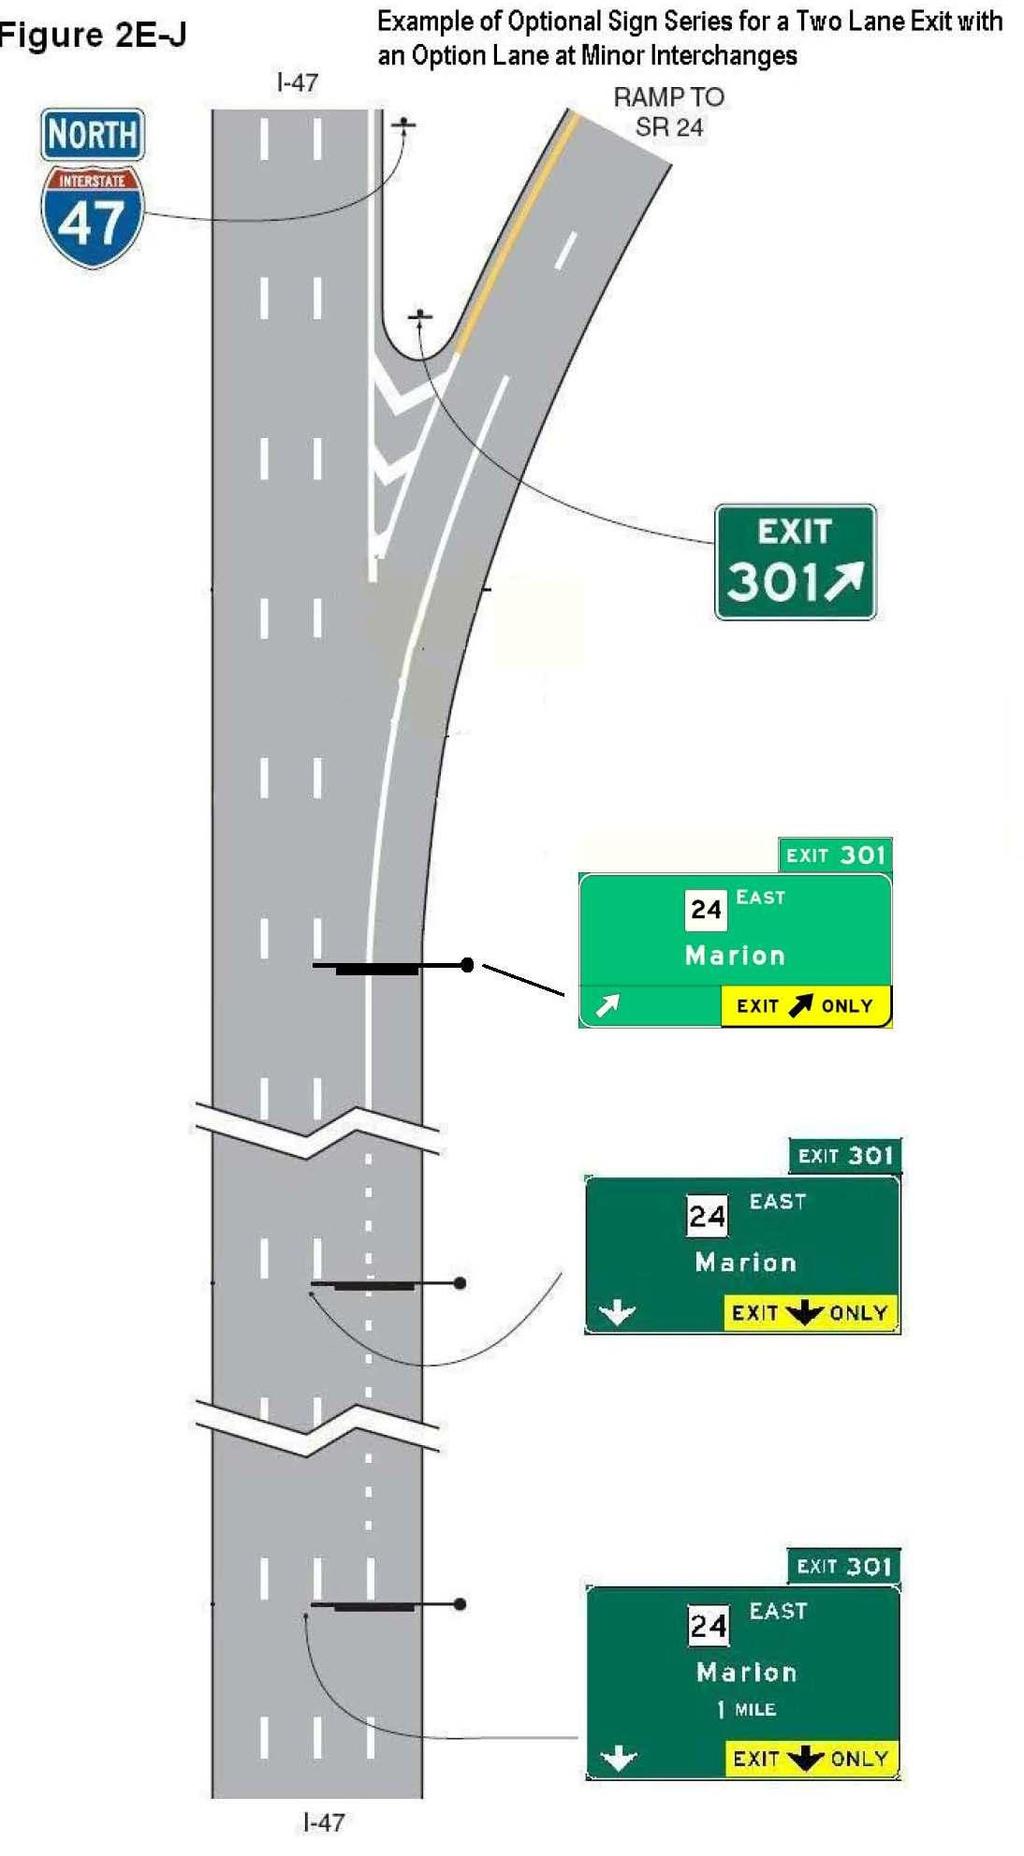 430 431 Change Figure Title to: Example of Alternative Sign Series for a Two Lane Exit with an Option Lane Text style 432 433 434 435 436 437 438 439 440 441 442 443 444 445 446 447 448 449 450 451